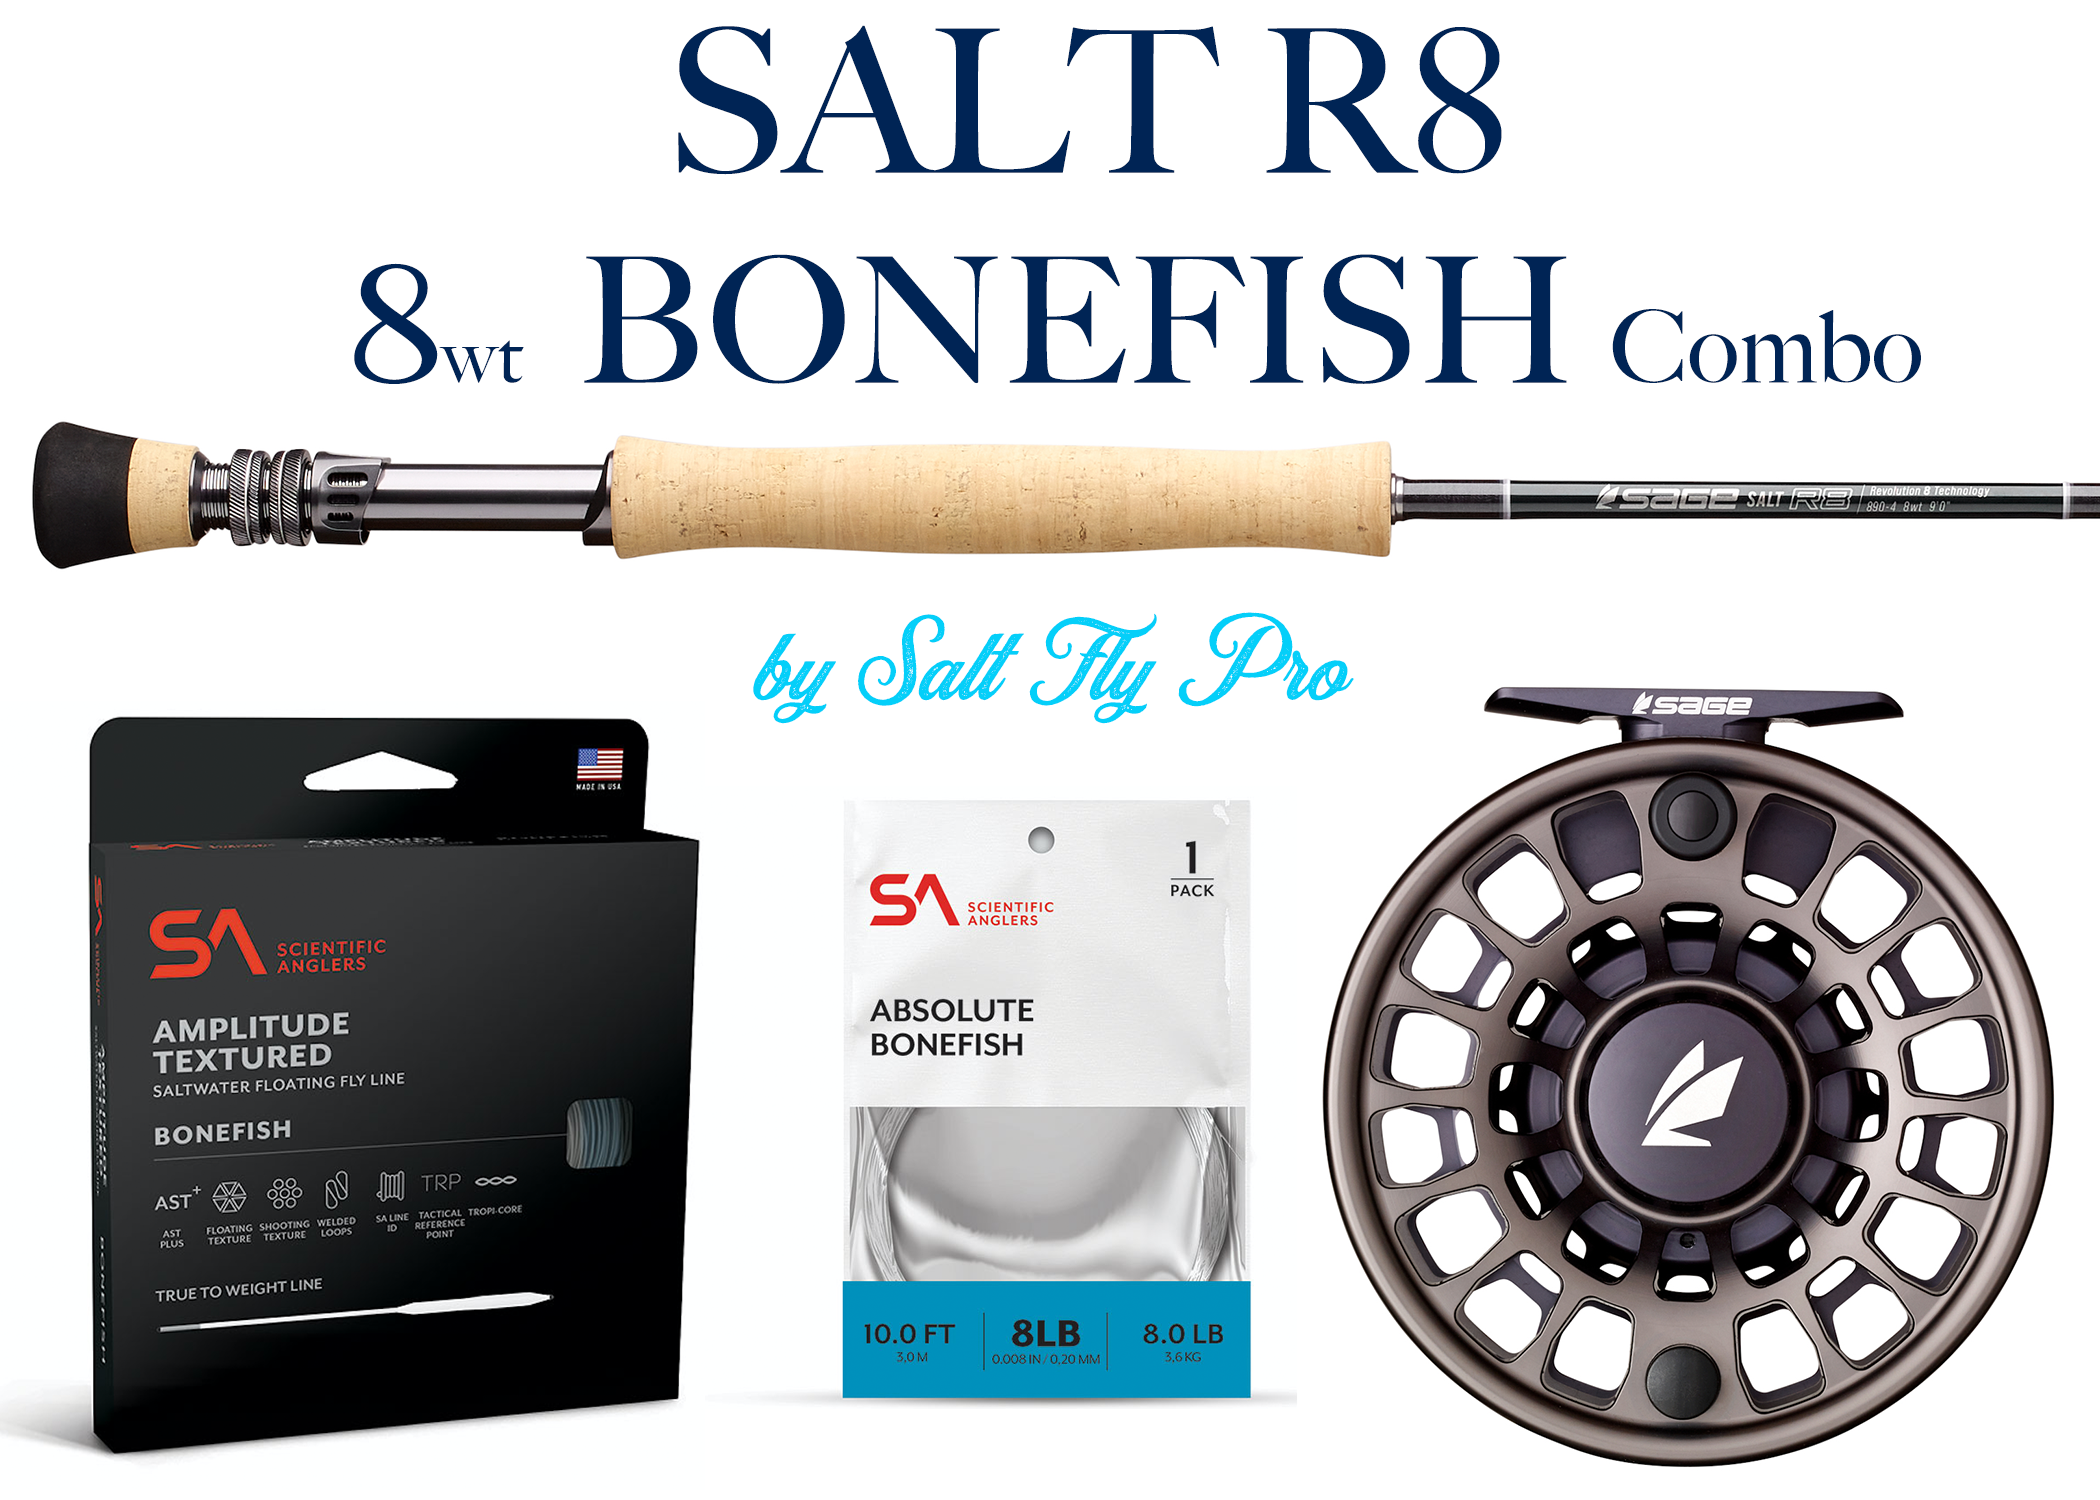 Sage SALT R8 8wt 890 Bonefish Fly Rod Combo Outfit